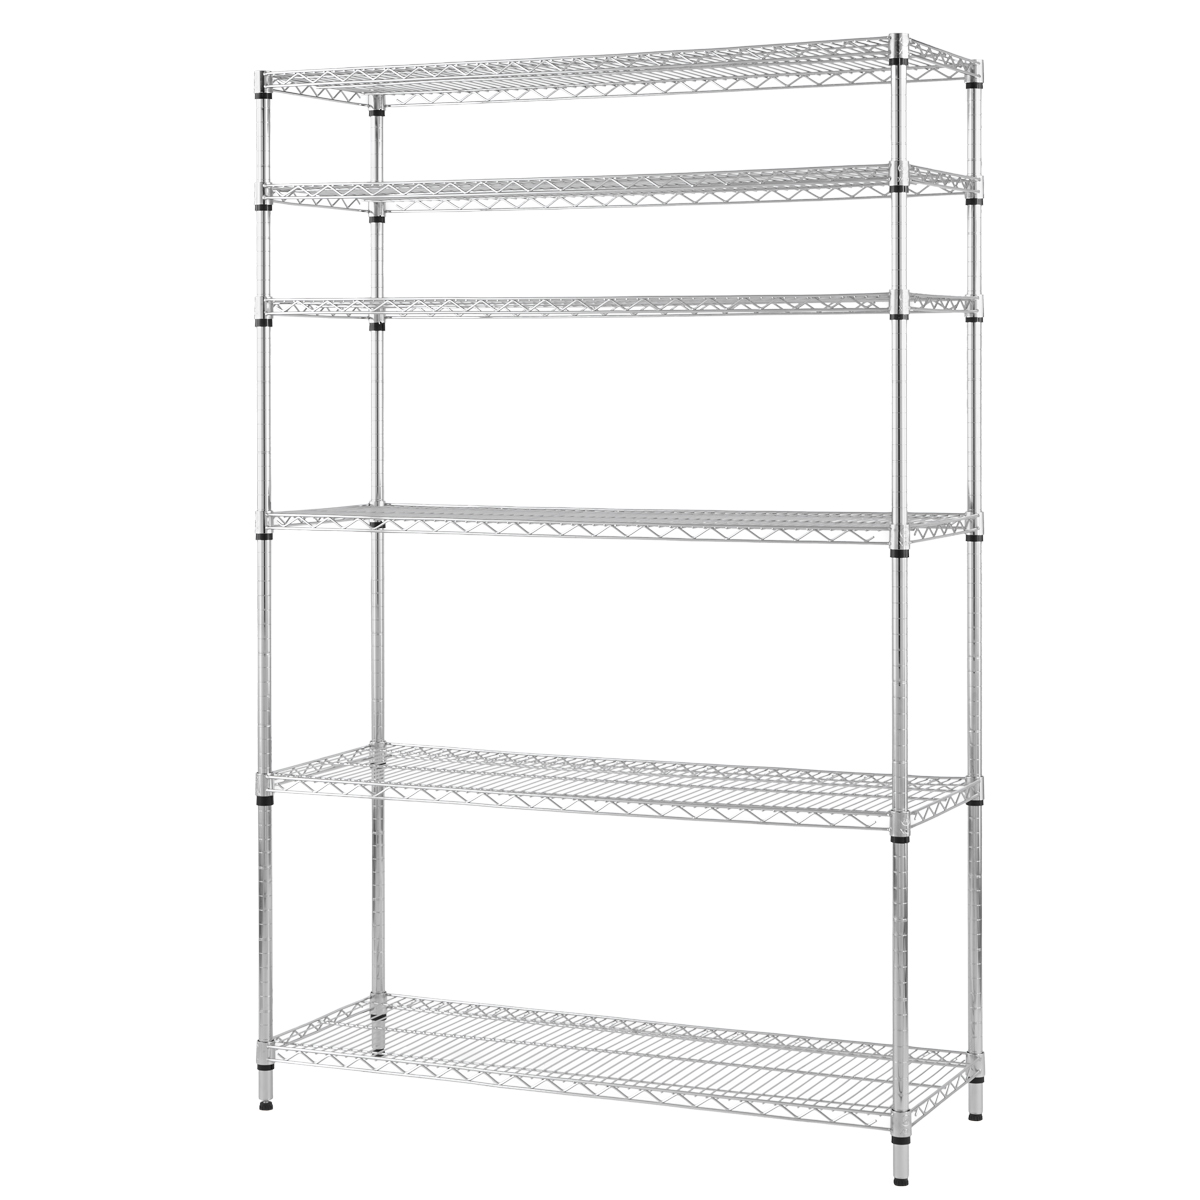 Wire Racks: Types, Materials, Applications, and Benefits